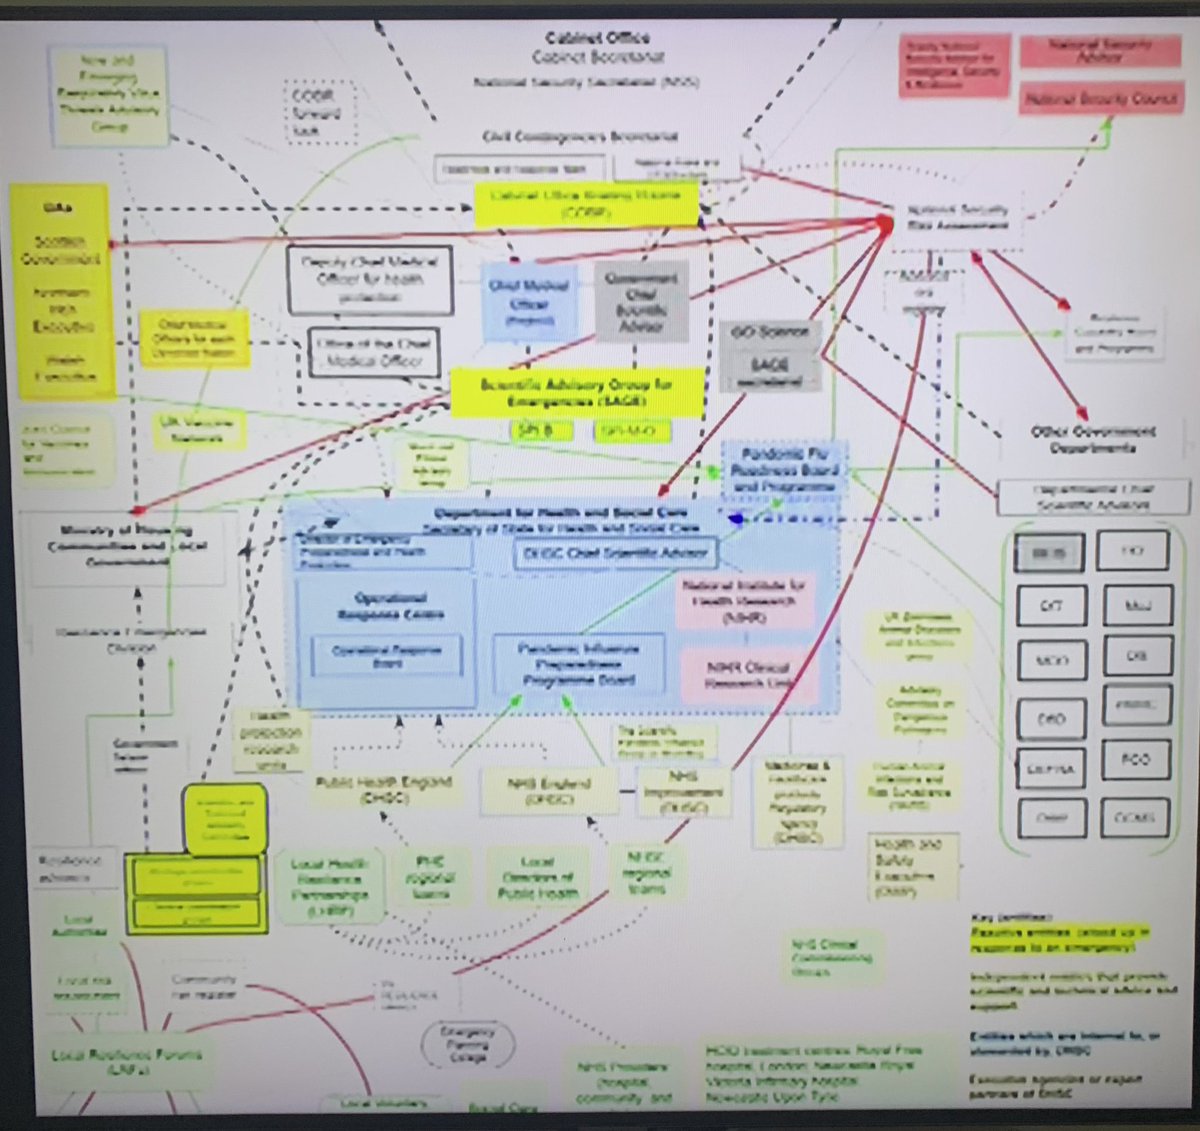 As seen on @Channel4 - Phenomenal org chart of the UK emergency preparedness situation, as the #CovidInquiry kicks off. Let’s see @MattHancock weasel his way through this one. #orgchart #ToriesCostLives